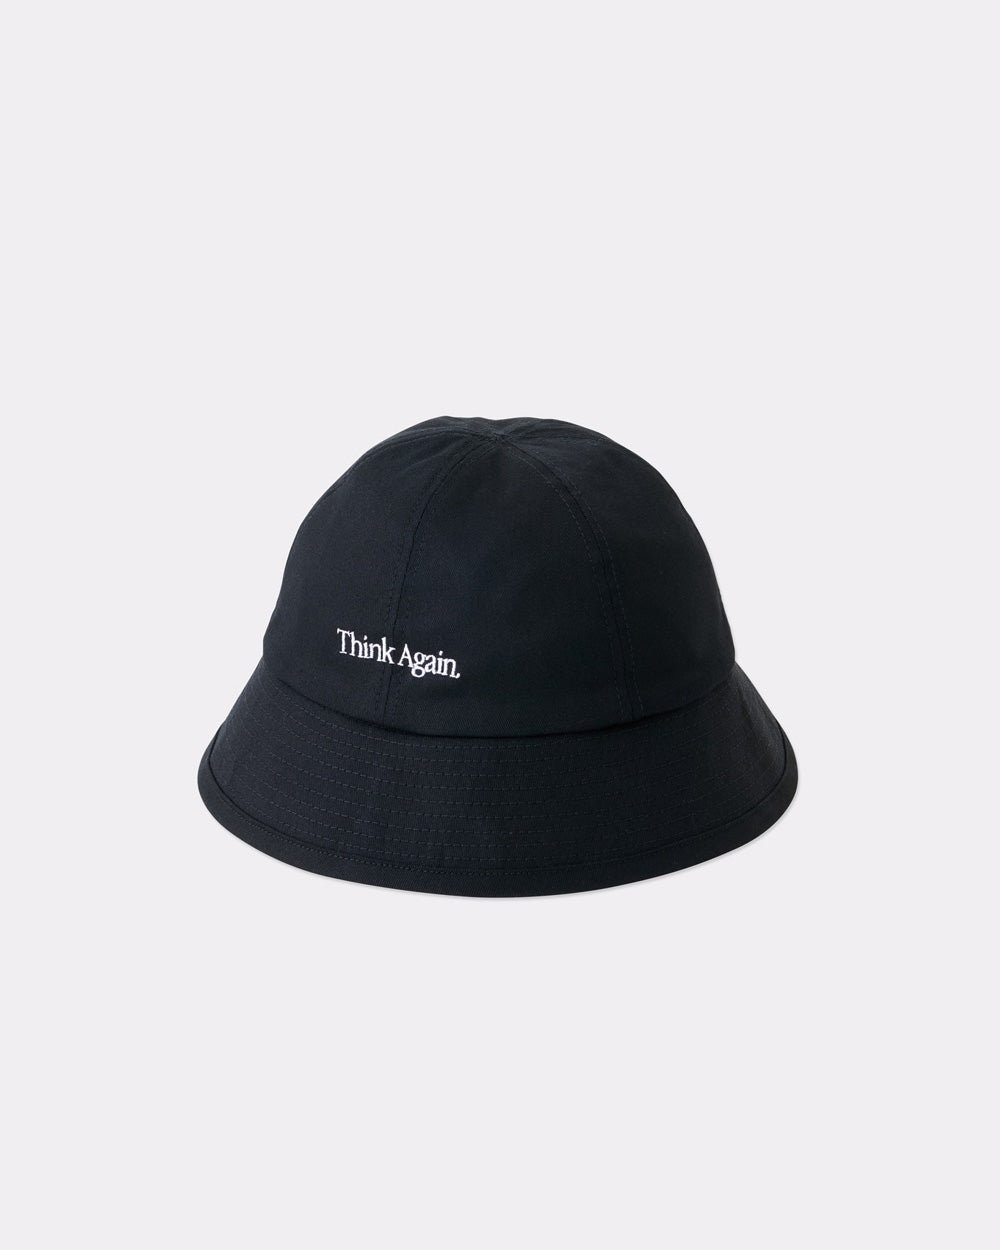 【NEWYOURS】PANEL HAT/THINK AGAIN - BLACK